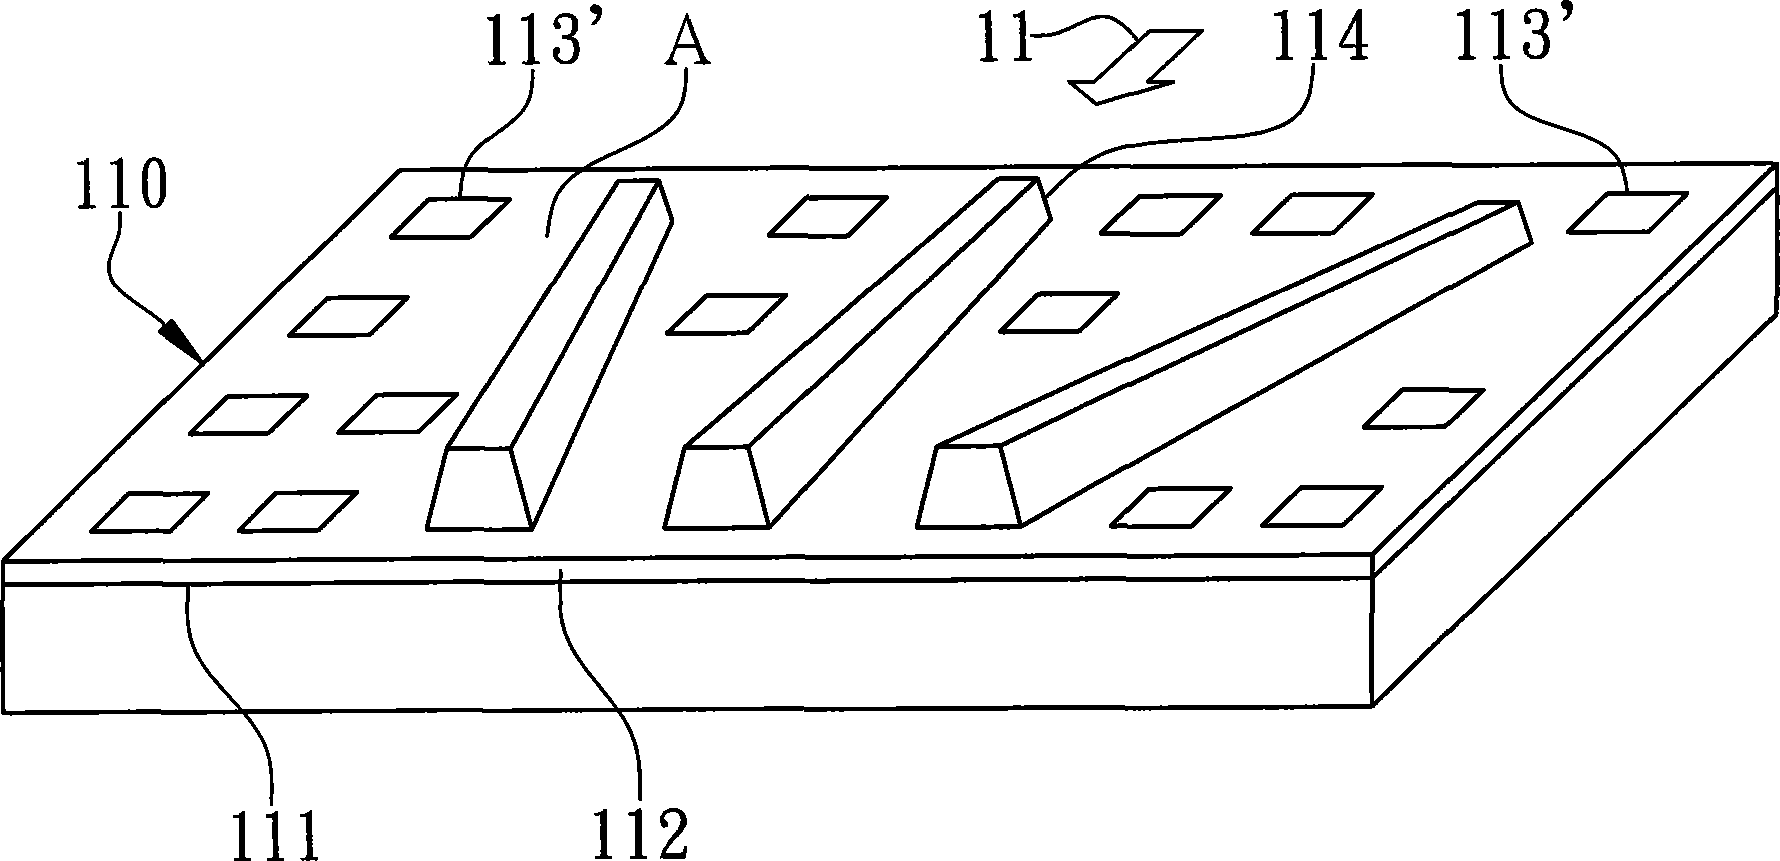 Structure and method of flip chip encapsulation of non-array bumps